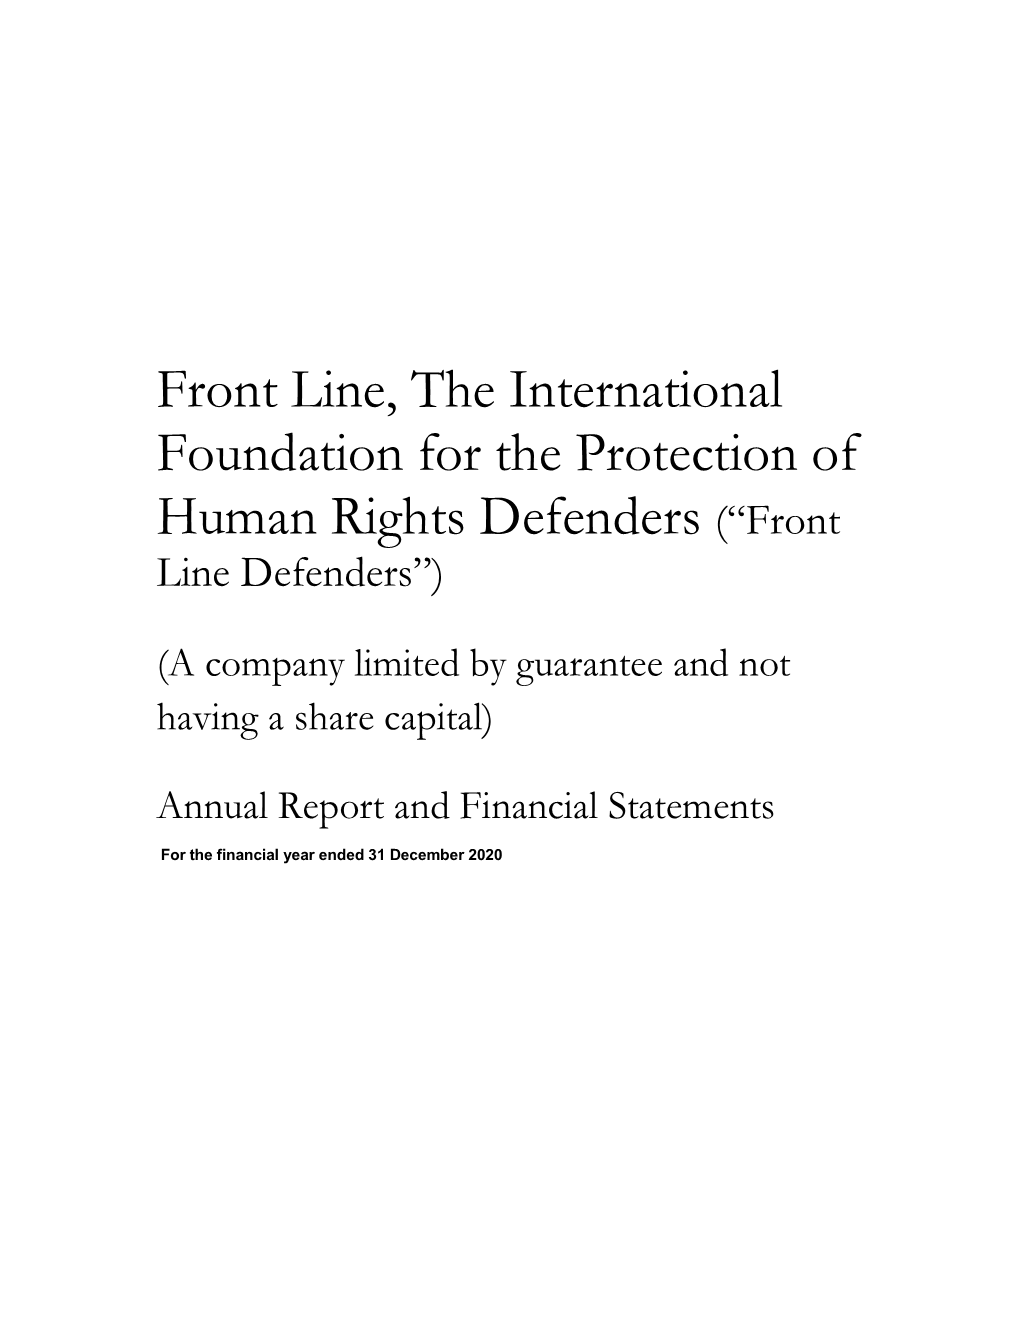 Front Line, the International Foundation for the Protection of Human Rights Defenders (“Front Line Defenders”)